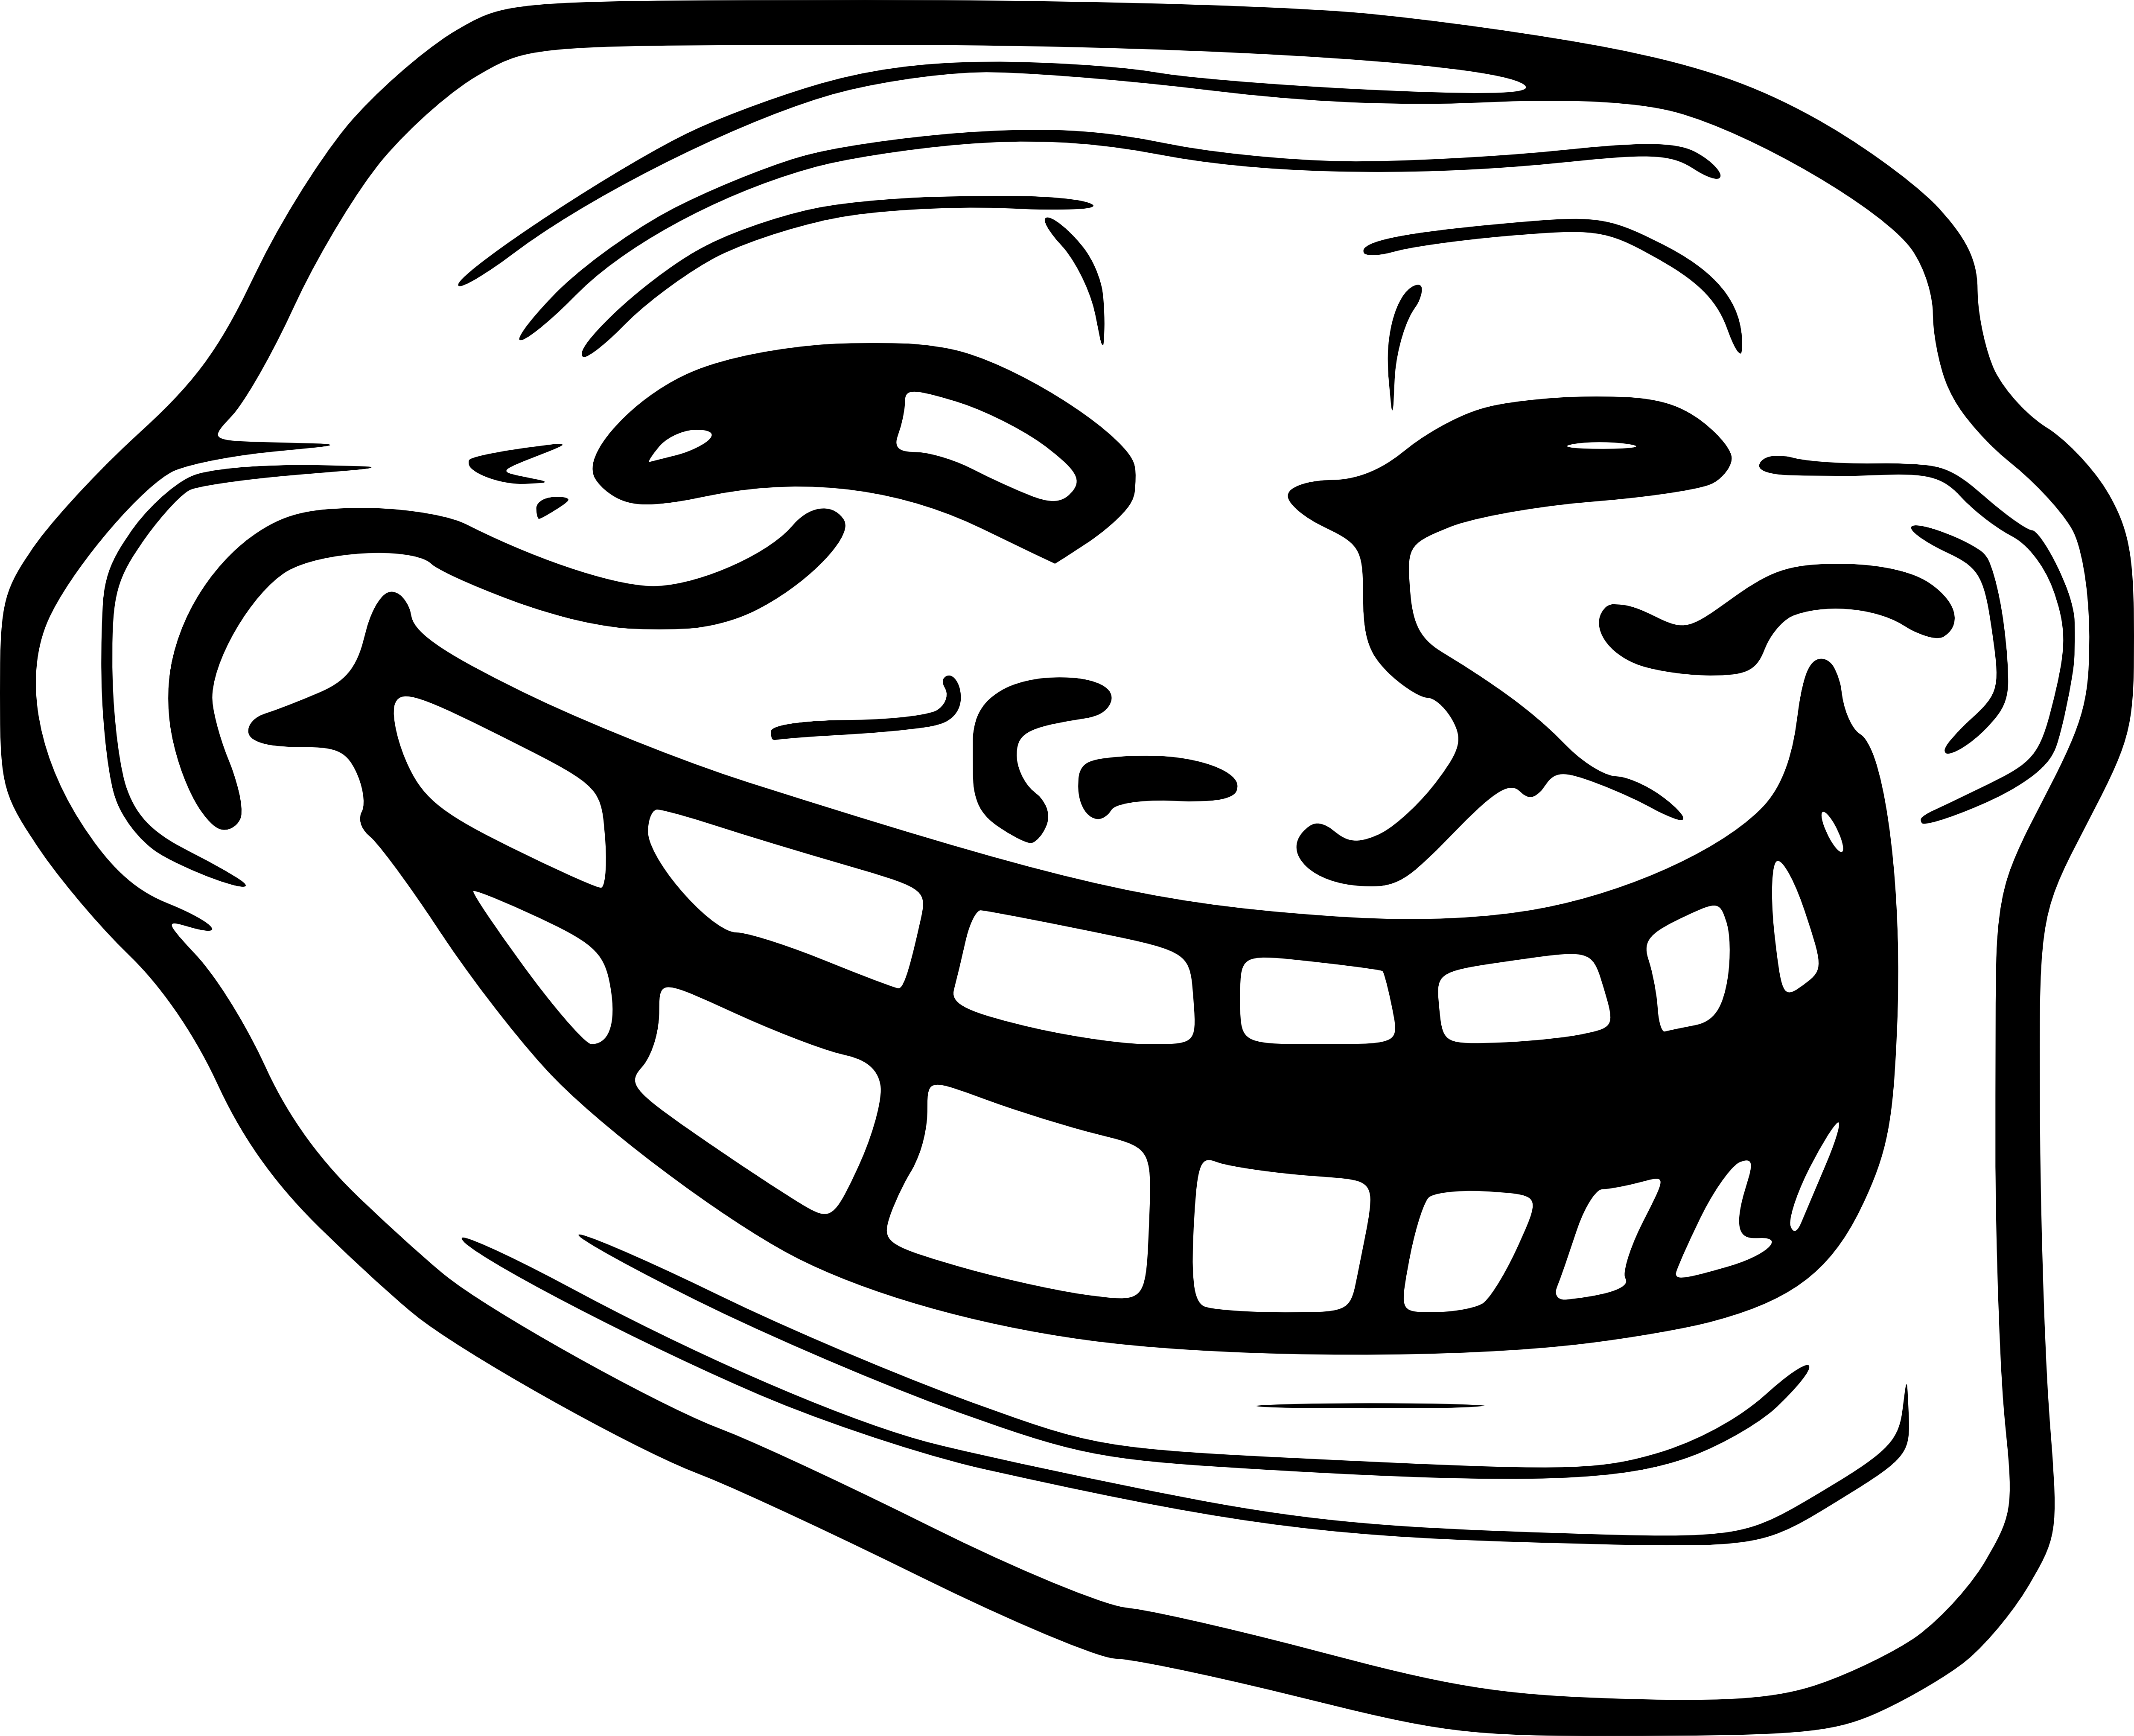 Image - Trollface.png - Fantendo, the Video Game Fanon Wiki